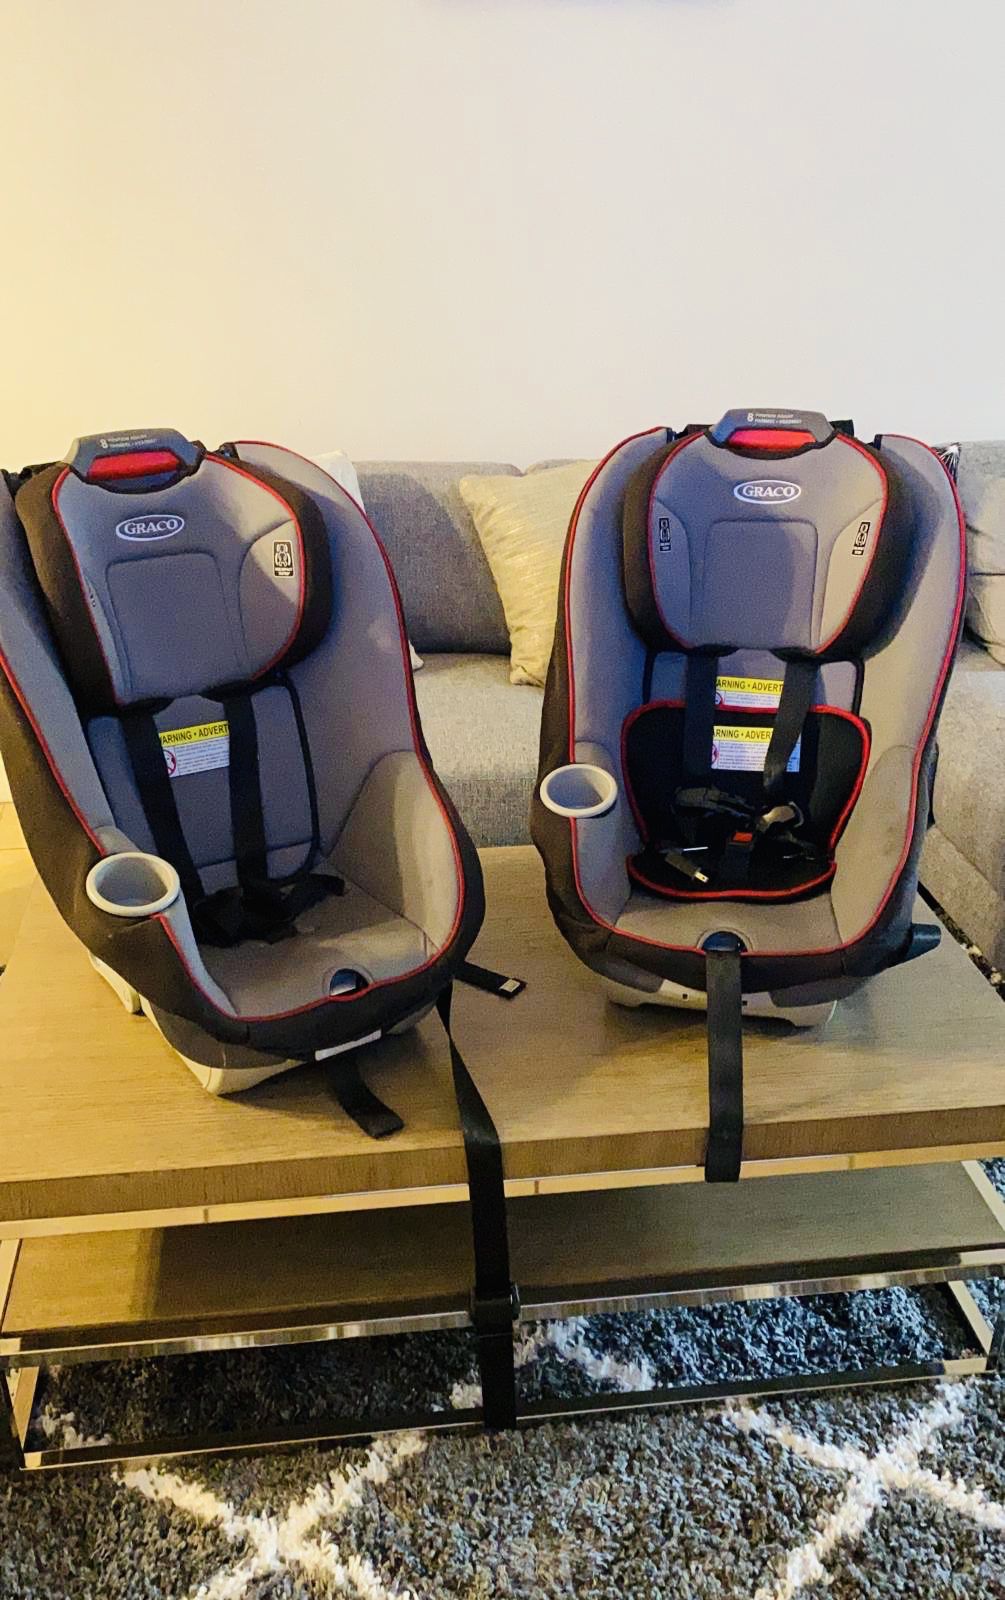 ONE Graco infant car seat